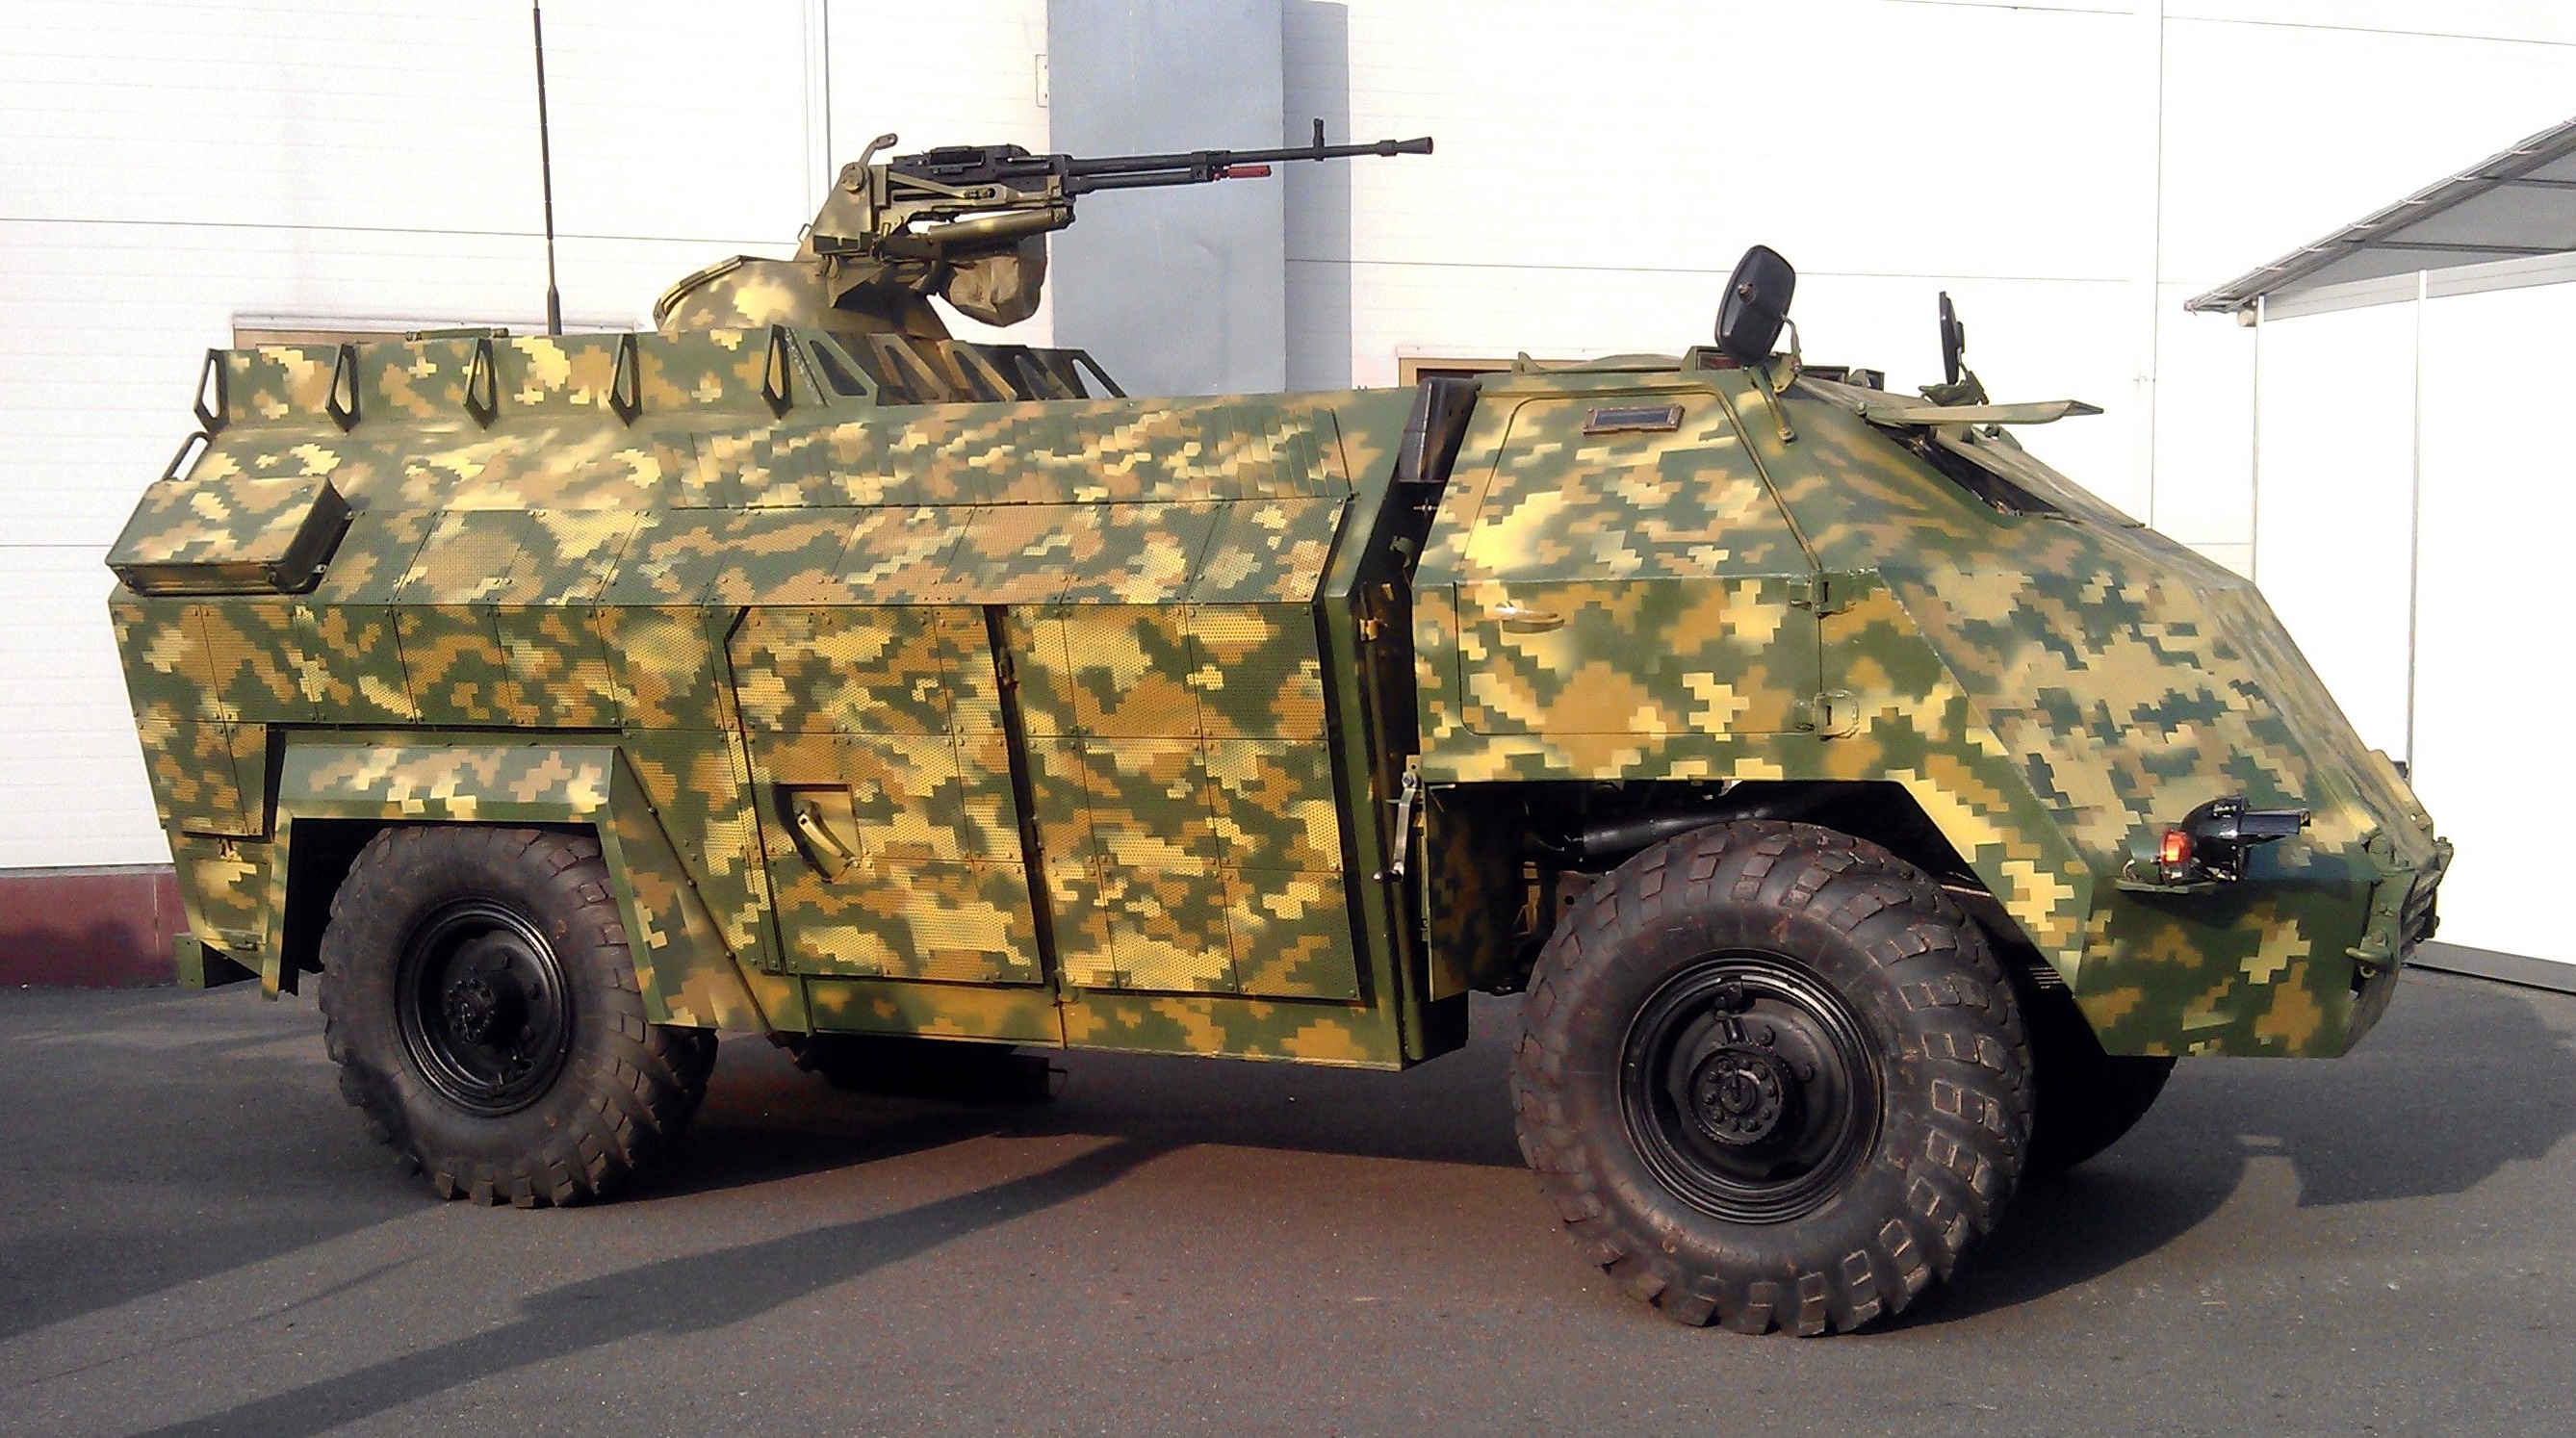 The Armed Forces of Ukraine have shown a "secret weapon" in the war against Russia - a unique Ukrainian armored vehicle "Gadfly", which is available in a single copy